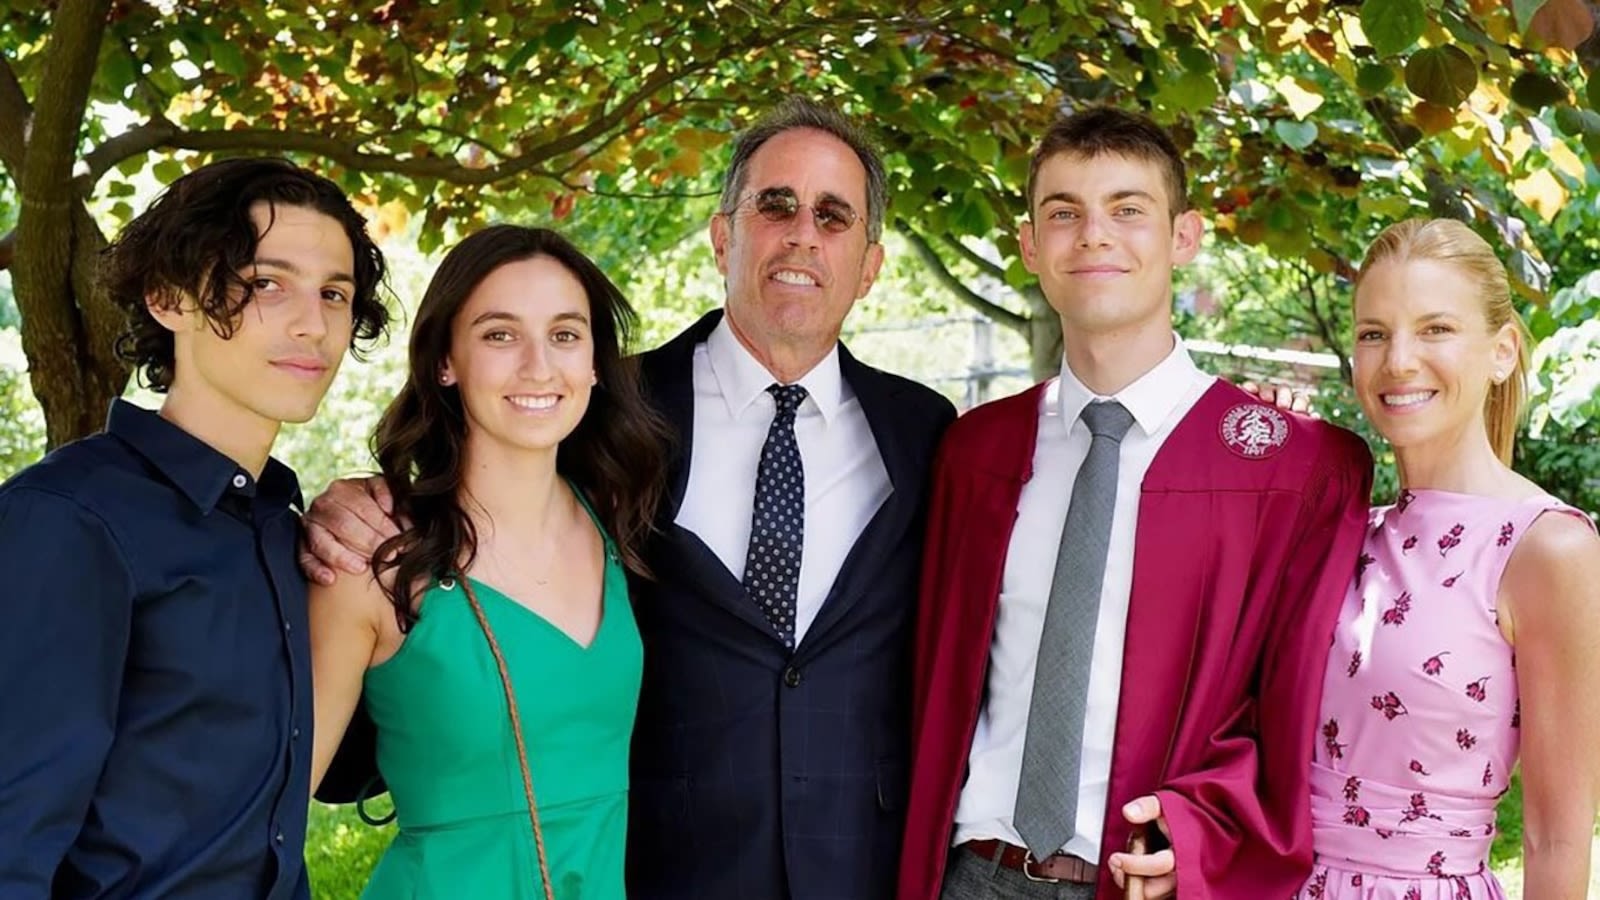 Jerry Seinfeld and wife give son a flip phone for high school graduation